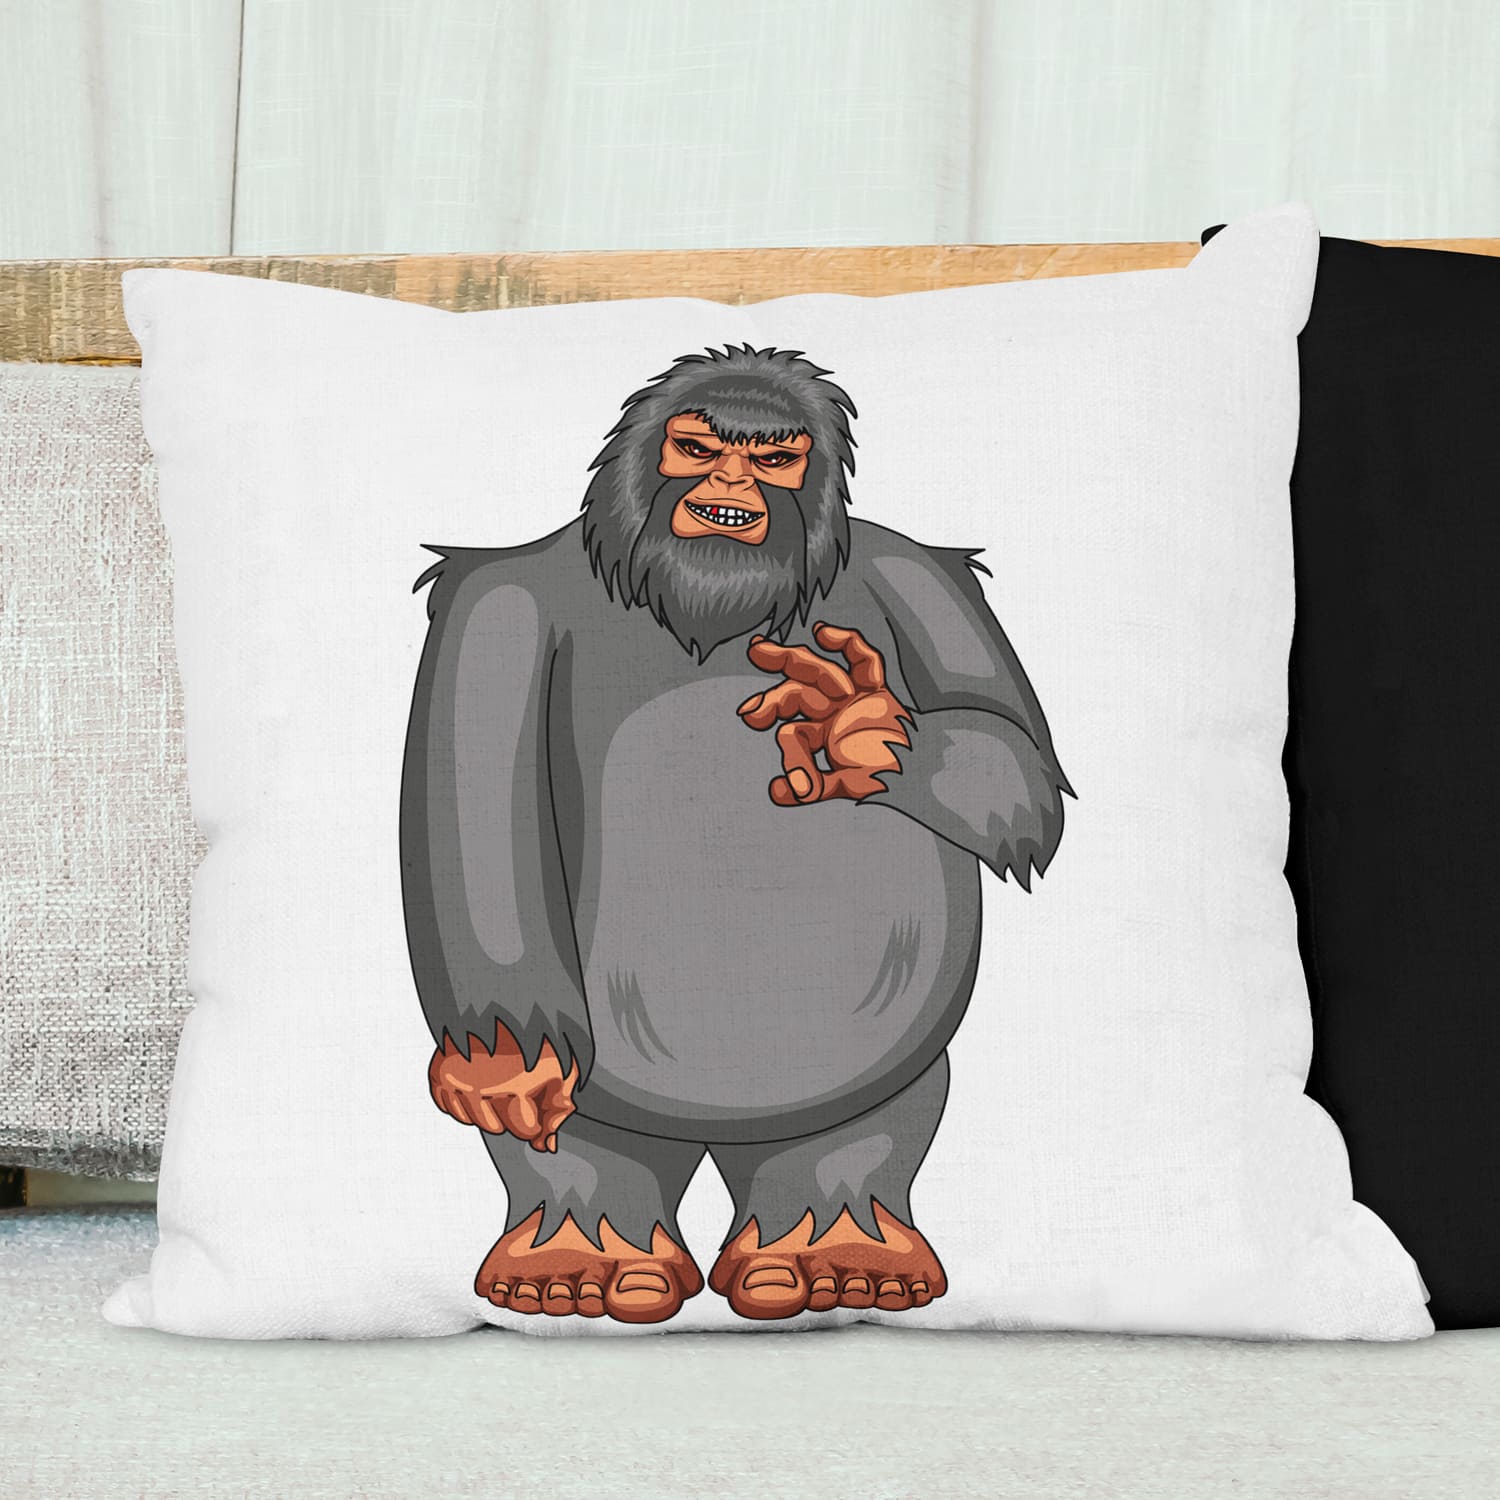 Pillow with a cartoon gorilla on it.